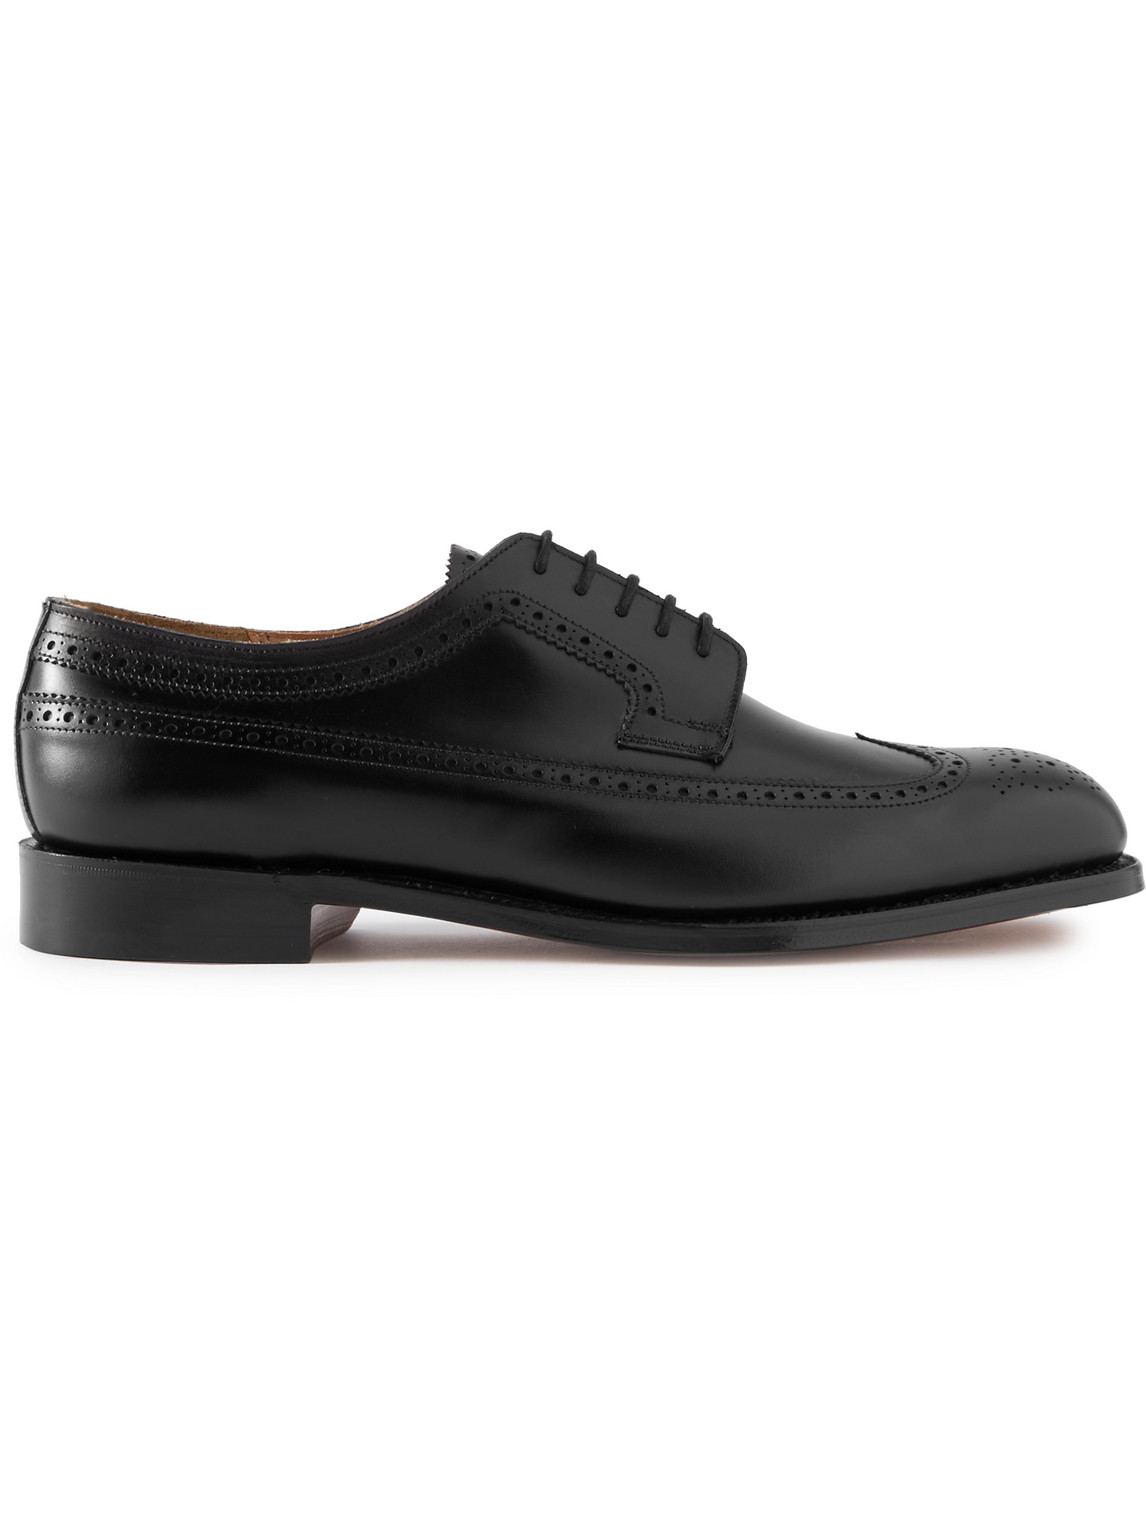 Grenson Canterbury Leather Wingtip Brogues In Black